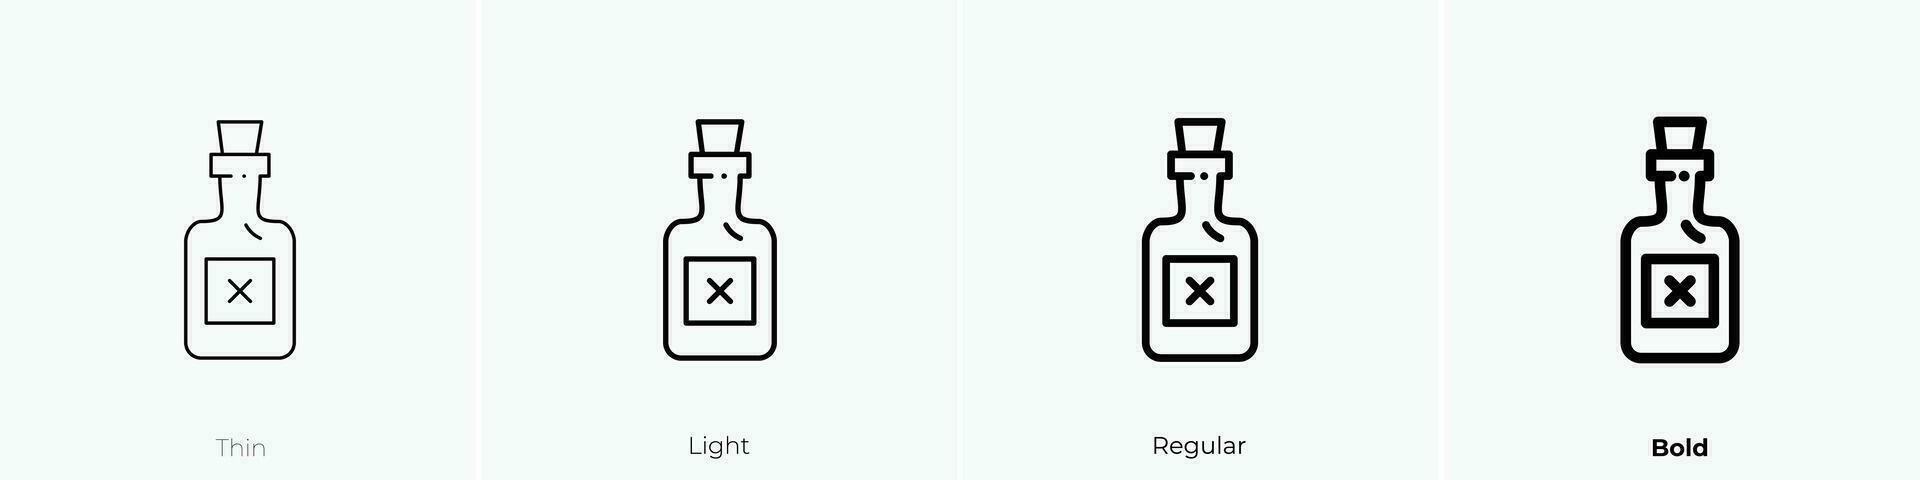 poison icon. Thin, Light, Regular And Bold style design isolated on white background vector